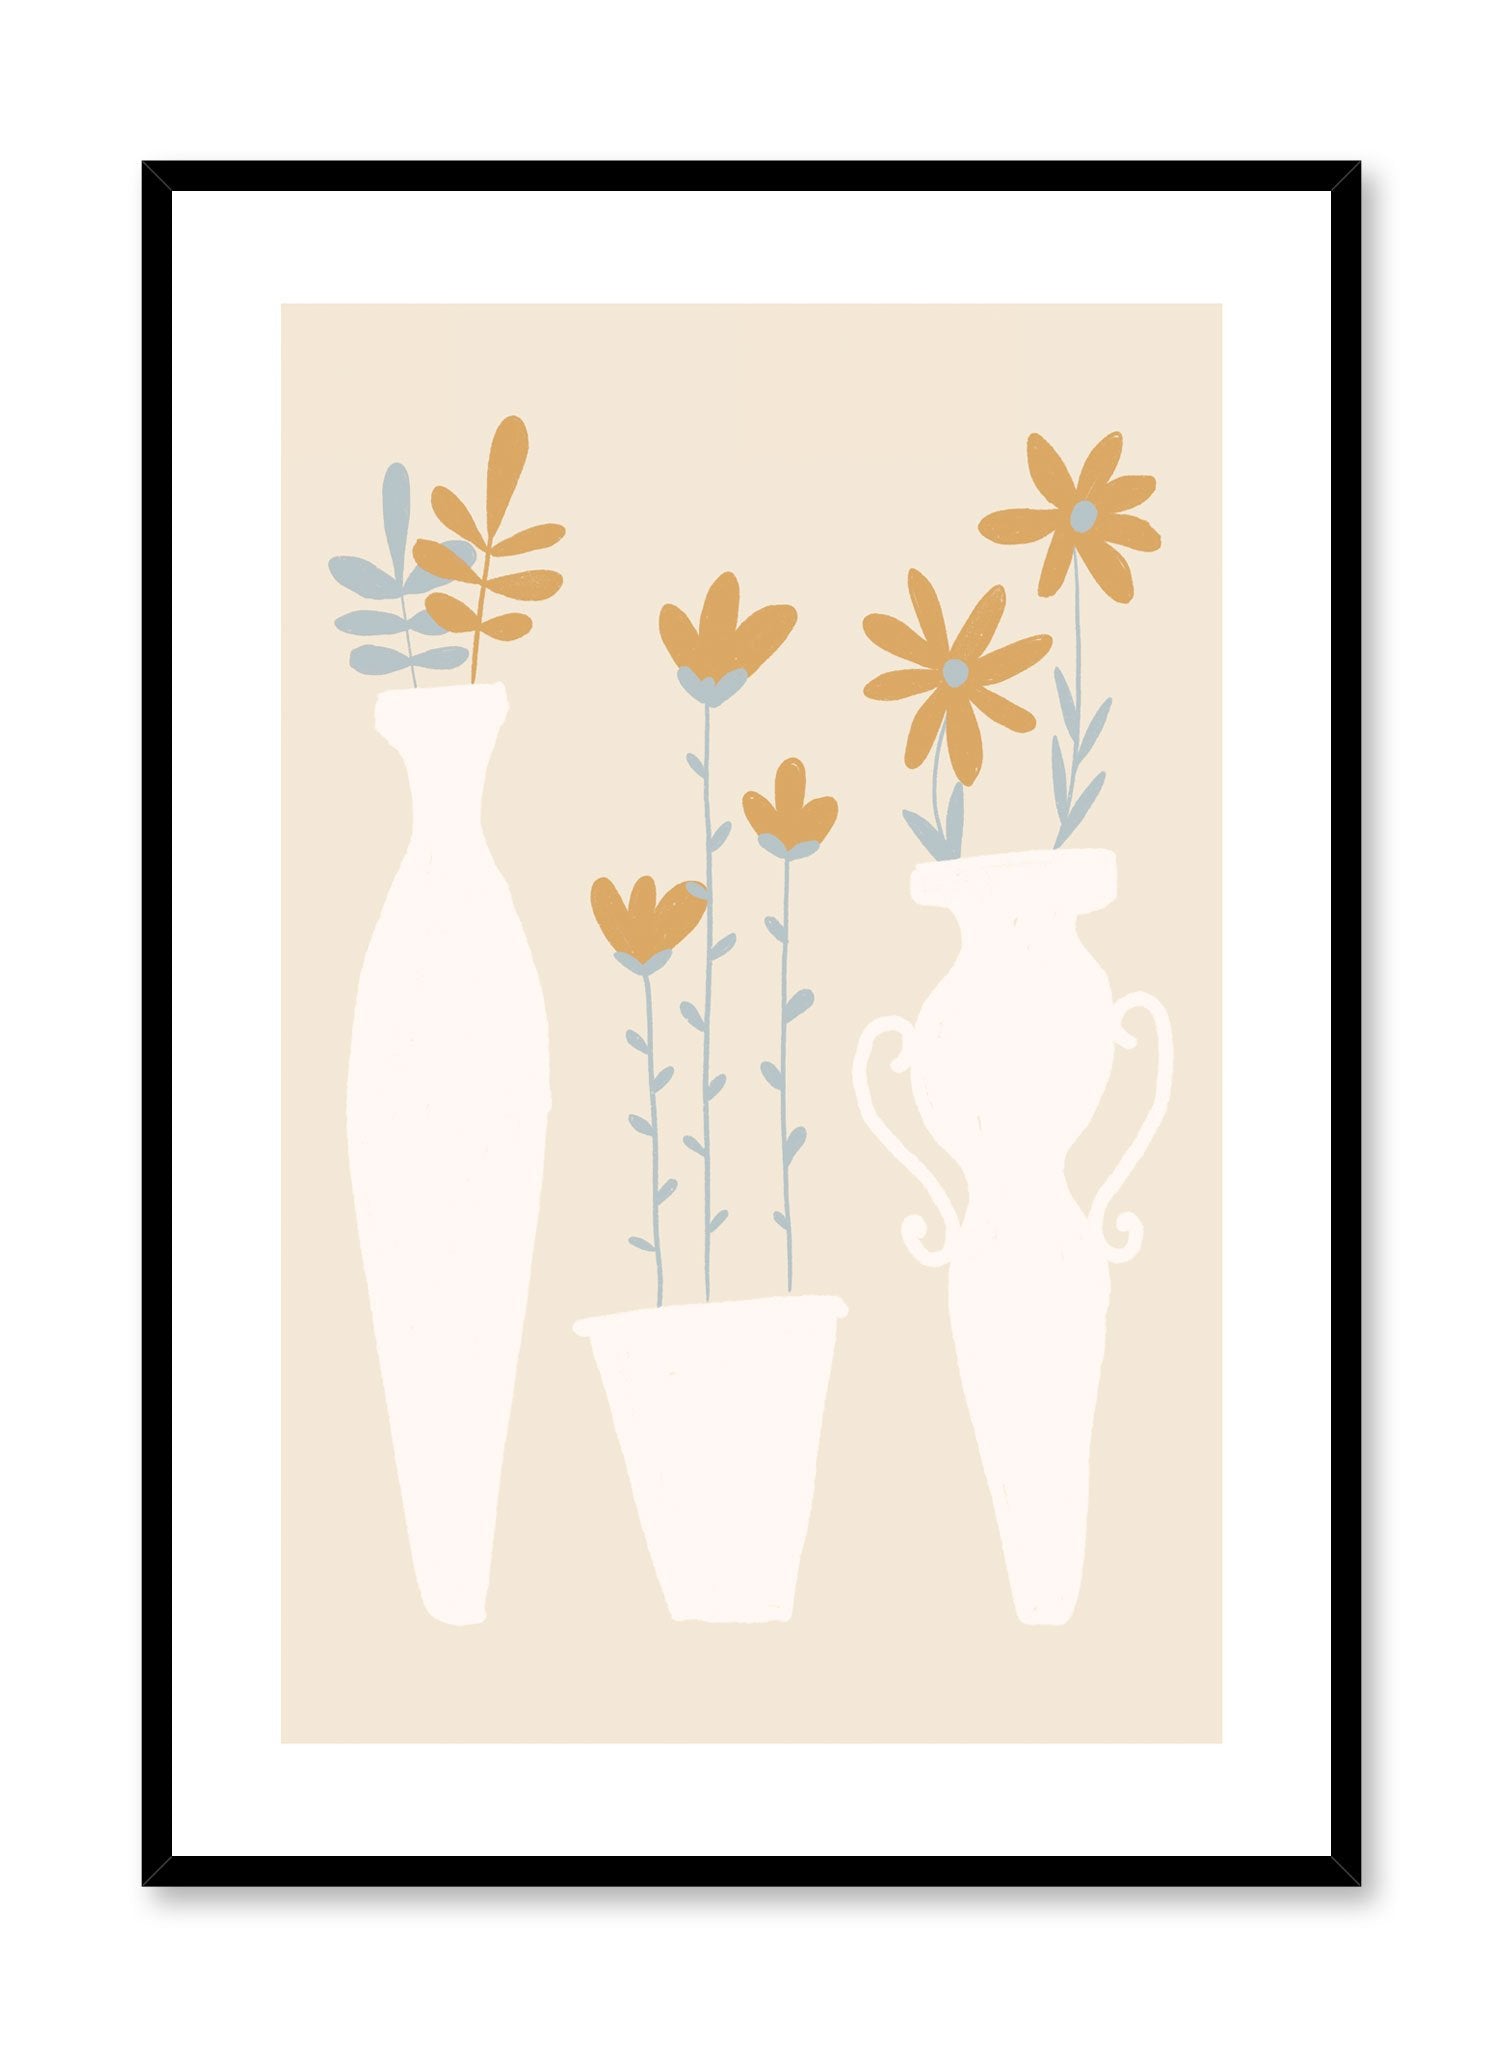 Freshly Picked is a minimalist illustration by Opposite Wall of three pots of orange flowers in fancy vases.